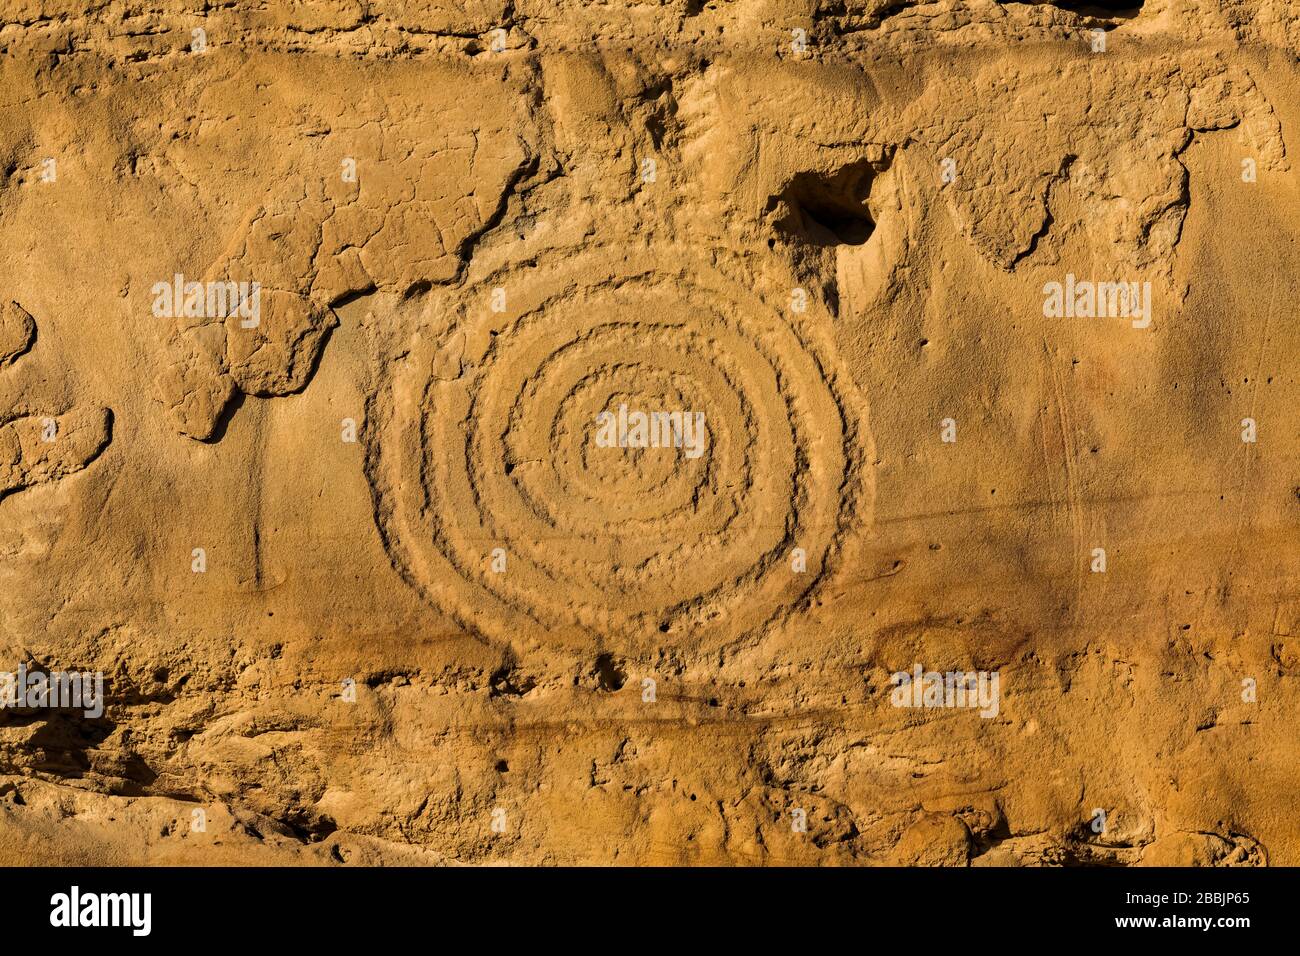 Spiral Petroglyph carved by ancestral Pueblo peoples, along the Petroglyph Trail in Chaco Culture National Historical Park, New Mexico, USA Stock Photo